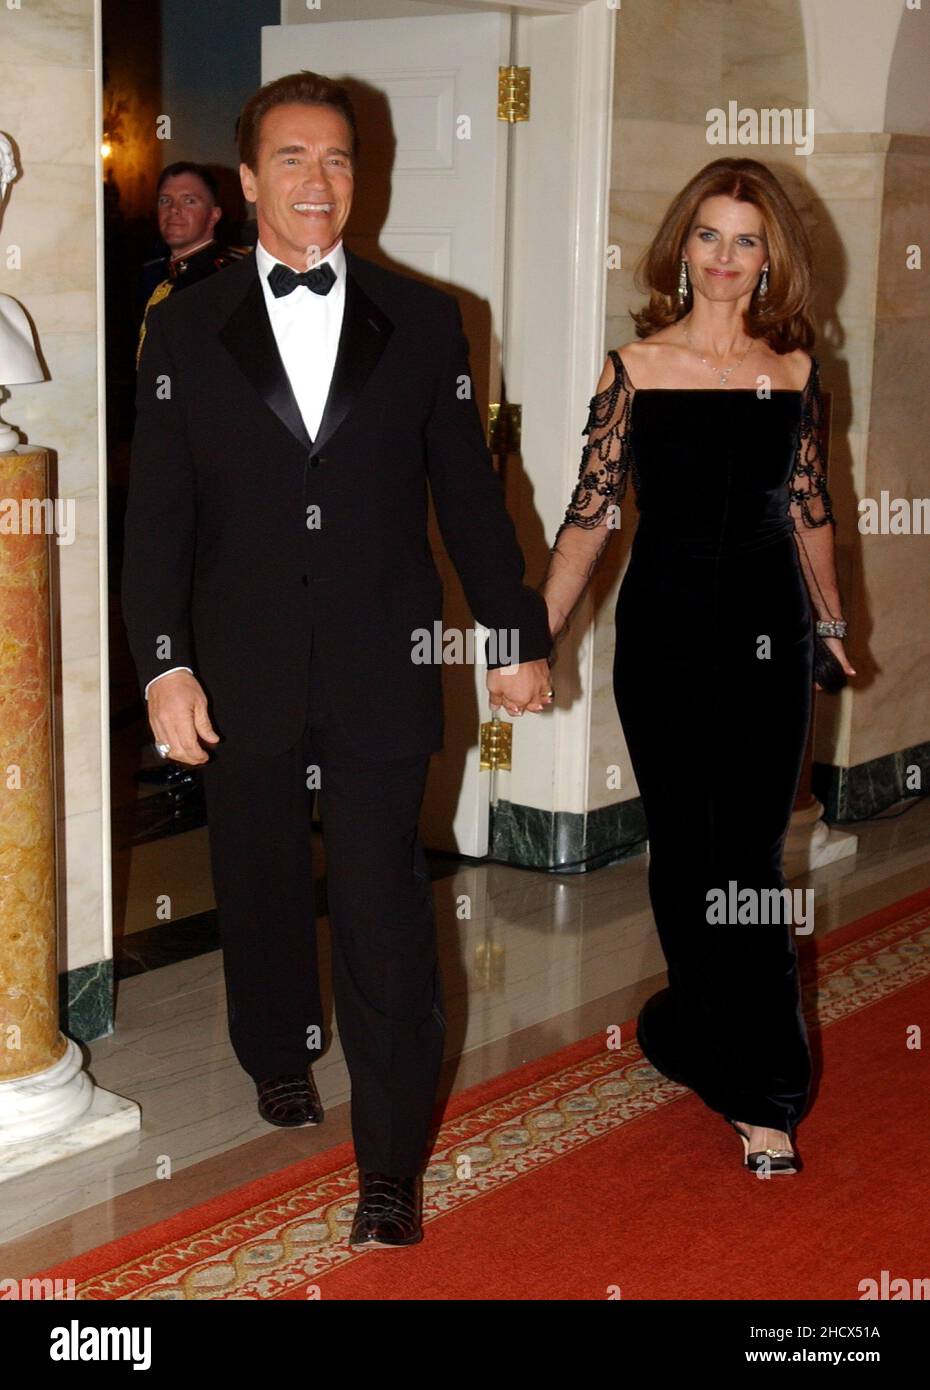 Washington, DC - February 22, 2004 -- California Governor Arnold Schwarzenegger and his wife, Maria Shriver, arrive at the White House in Washington, DC on February 22, 2004.  They were attending the 2004 National Governors Association Dinner with United States President George W. Bush..Credit: Ron Sachs / CNP Stock Photo